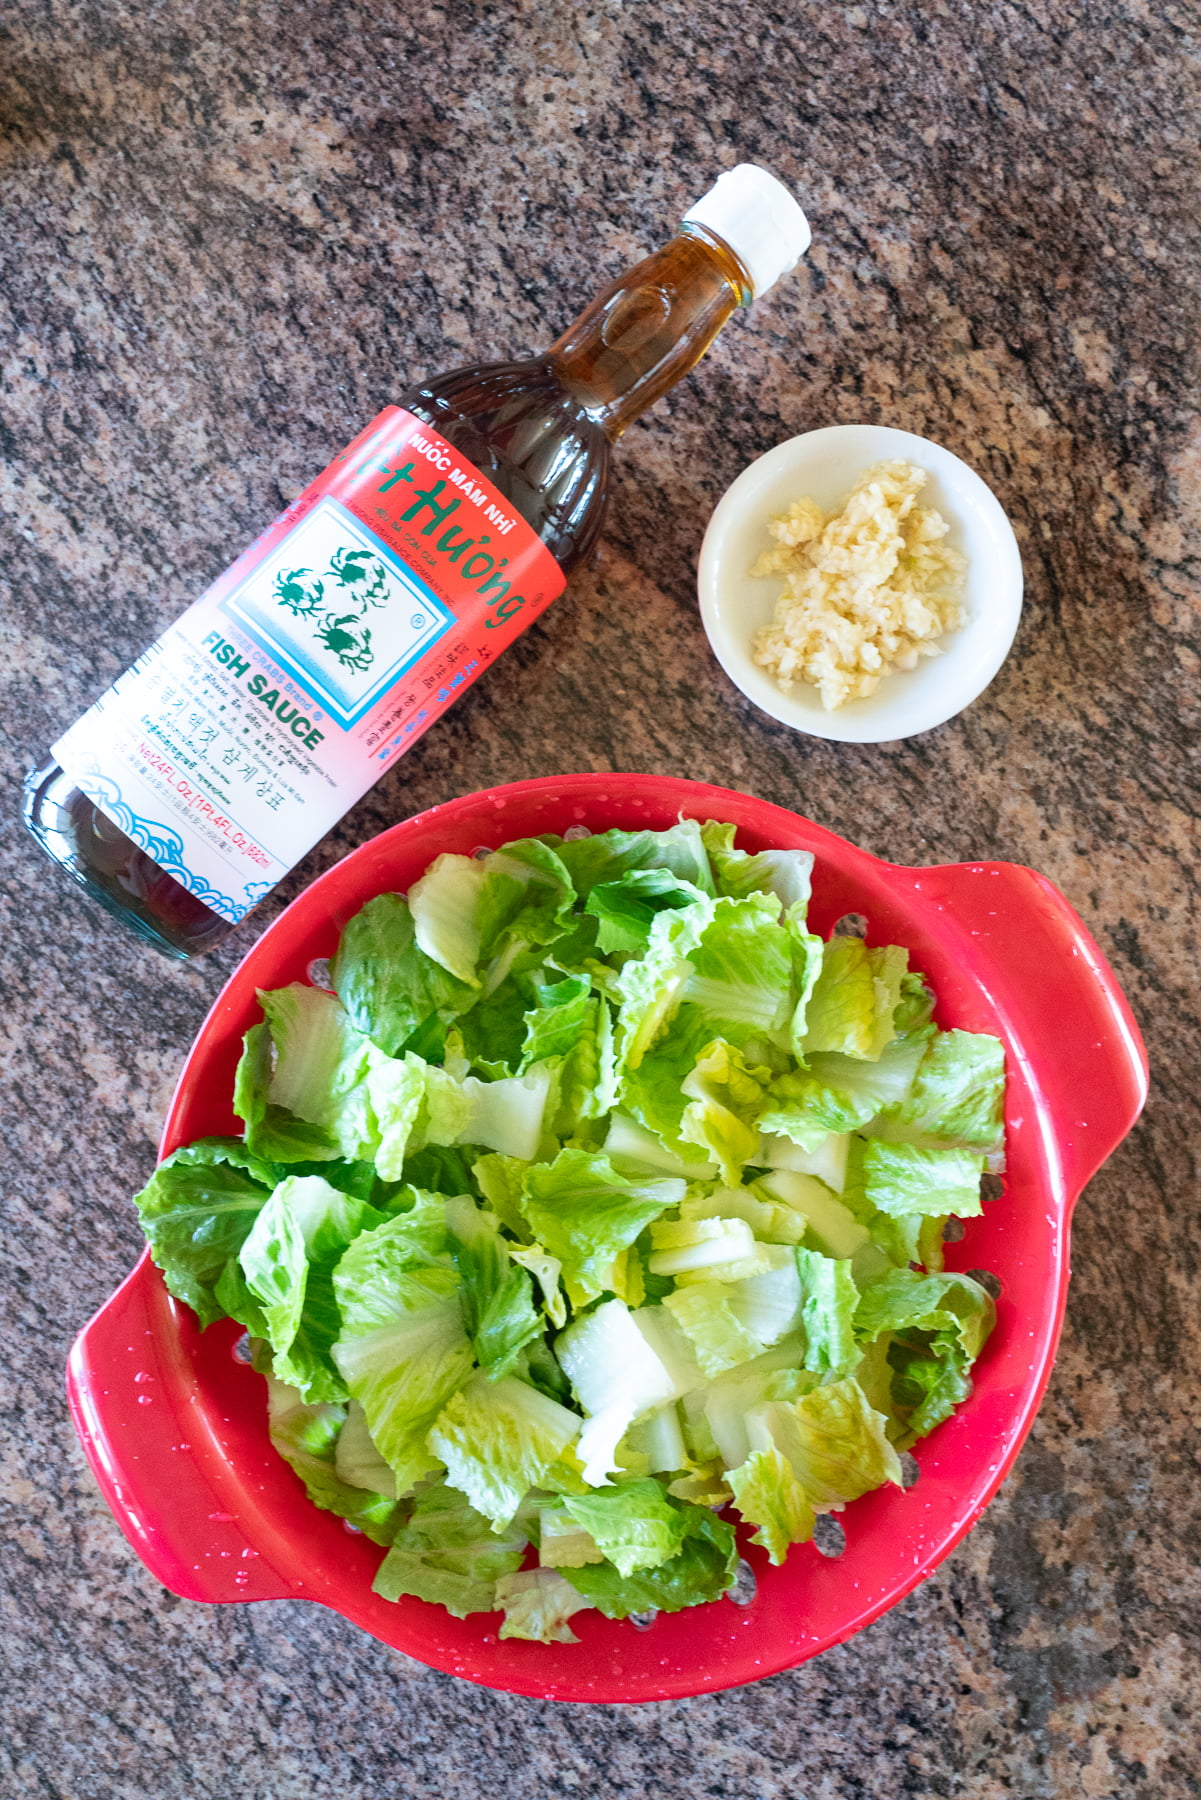 Ingredients for stir fried lettuce laid out on a countertop.